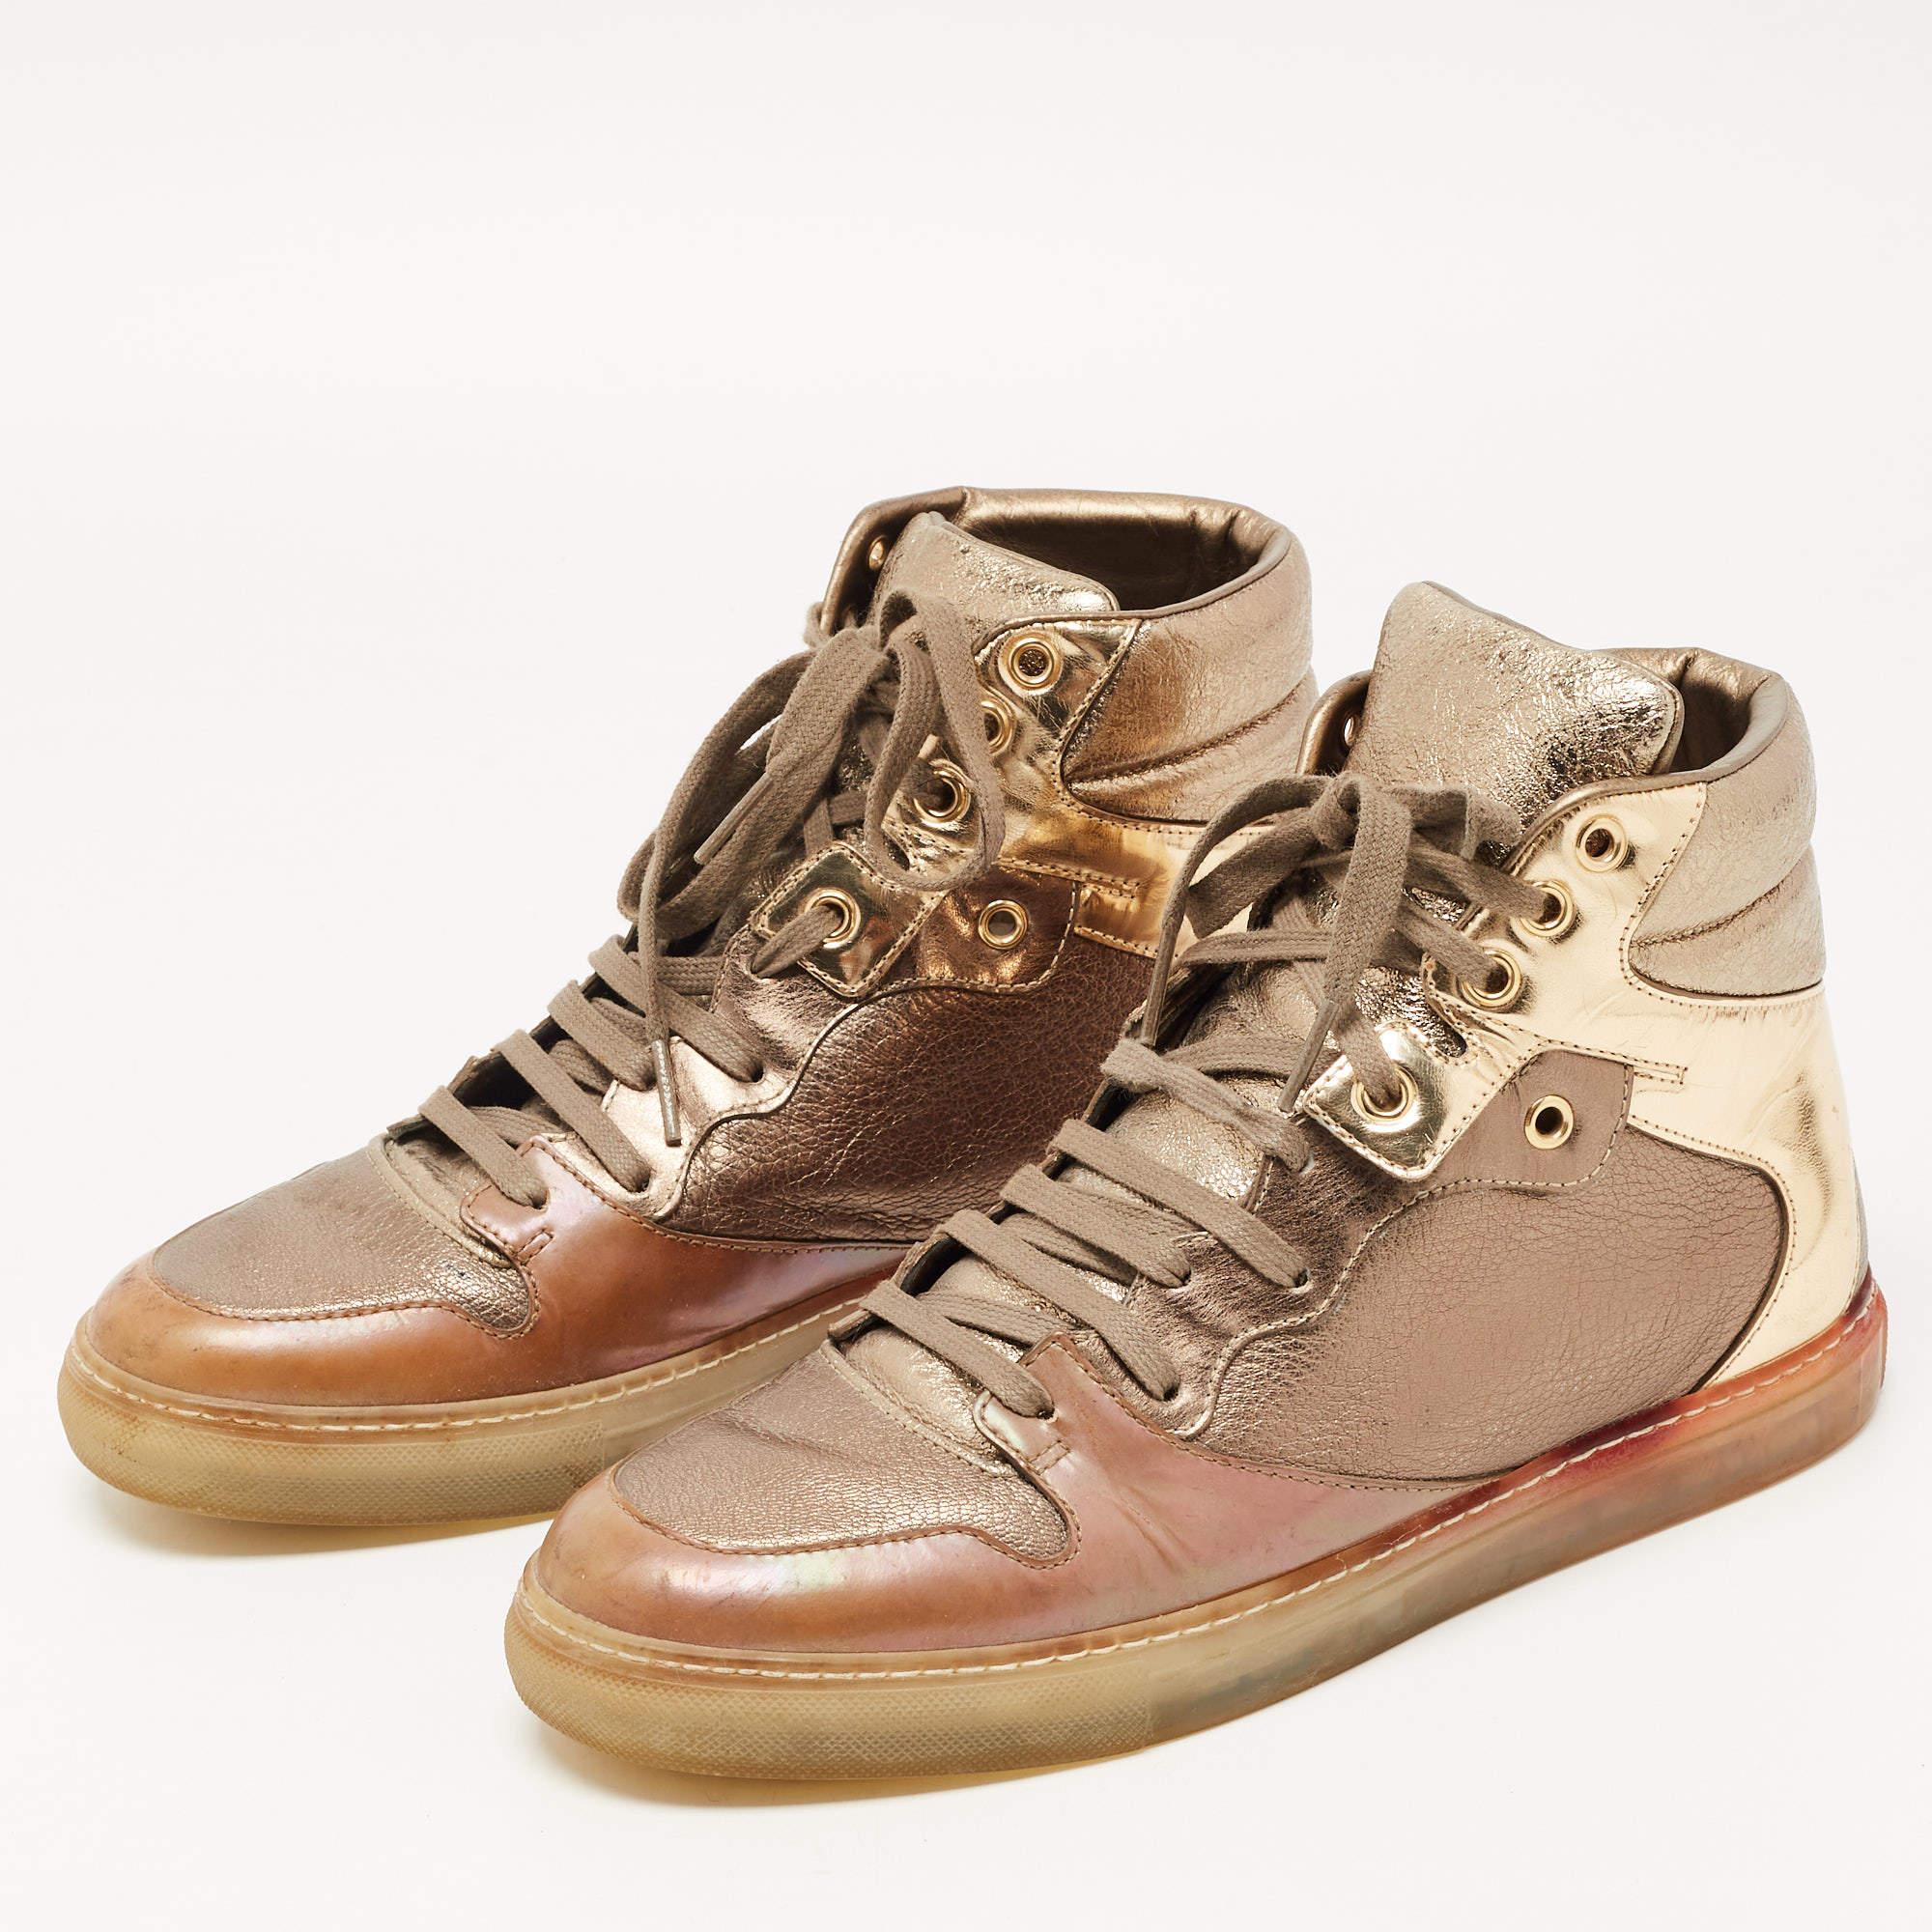 Balenciaga Metallic Tricolor Leather High Top Sneakers Size 40 For Sale 3